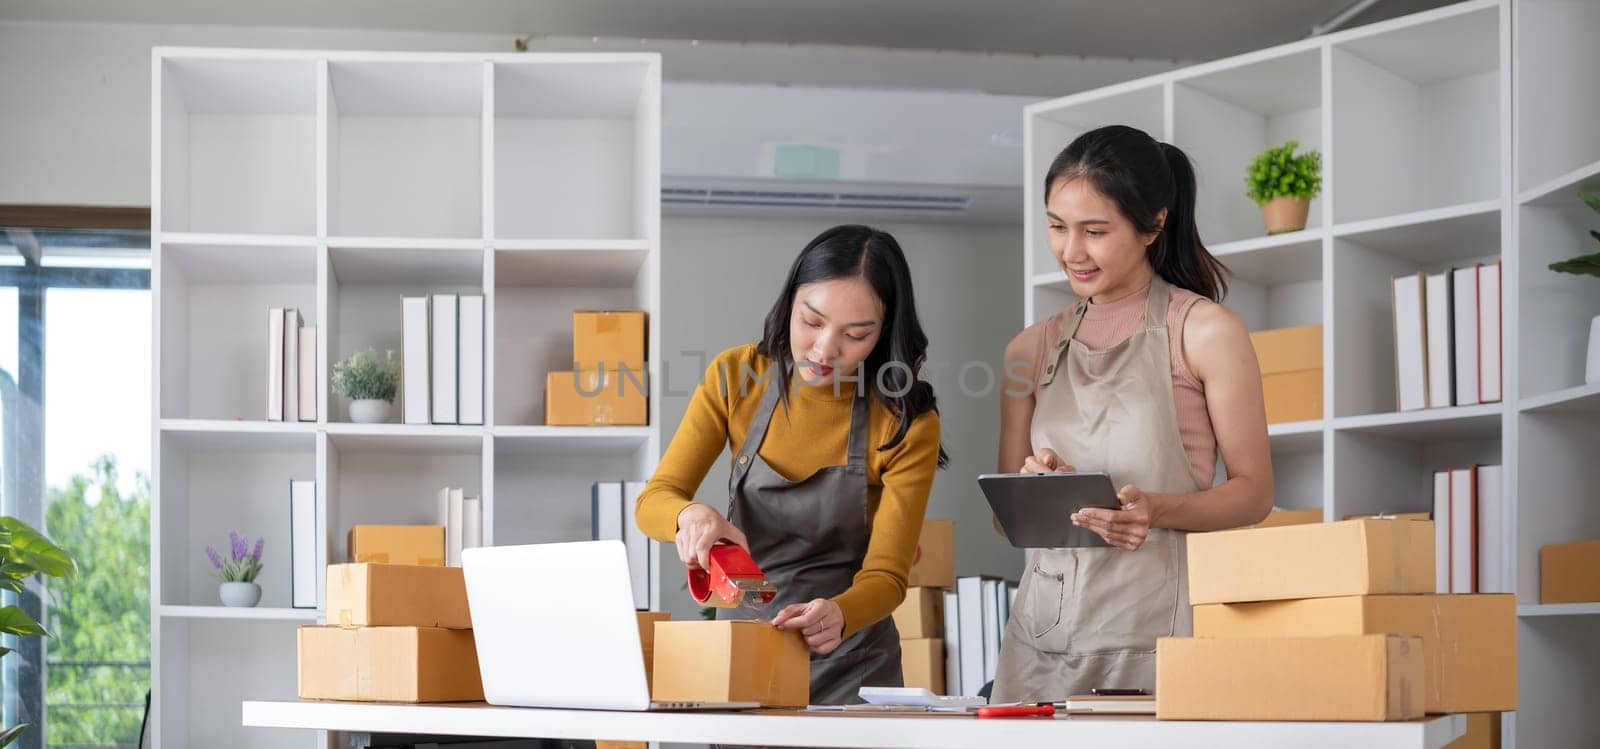 Couple of young Asian women running a small business together selling products online using laptops by wichayada